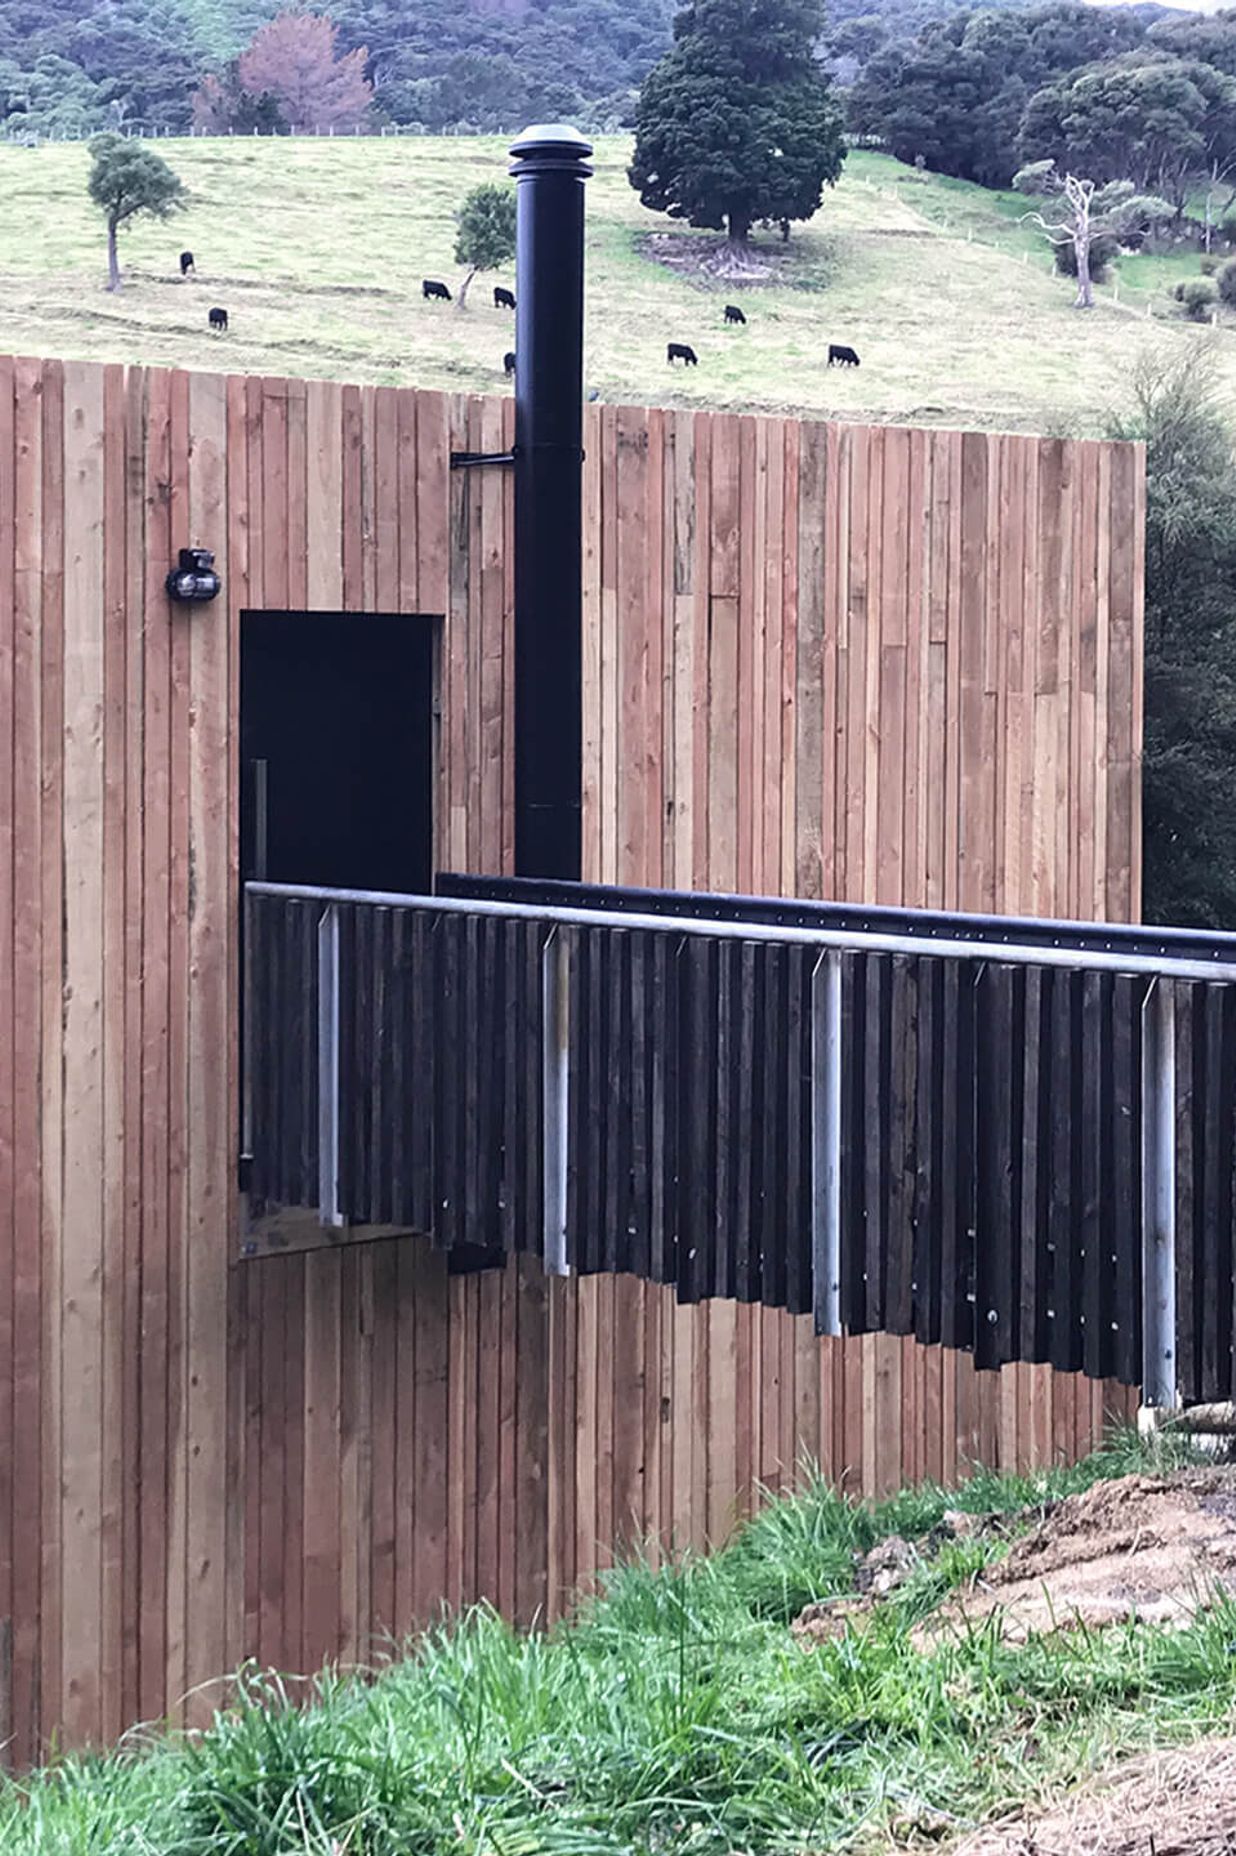 A close-up view shows the vertical lines of the Doublas fir weatherproof rainscreen against the timber and black-steel structure of the bridged entranceway.